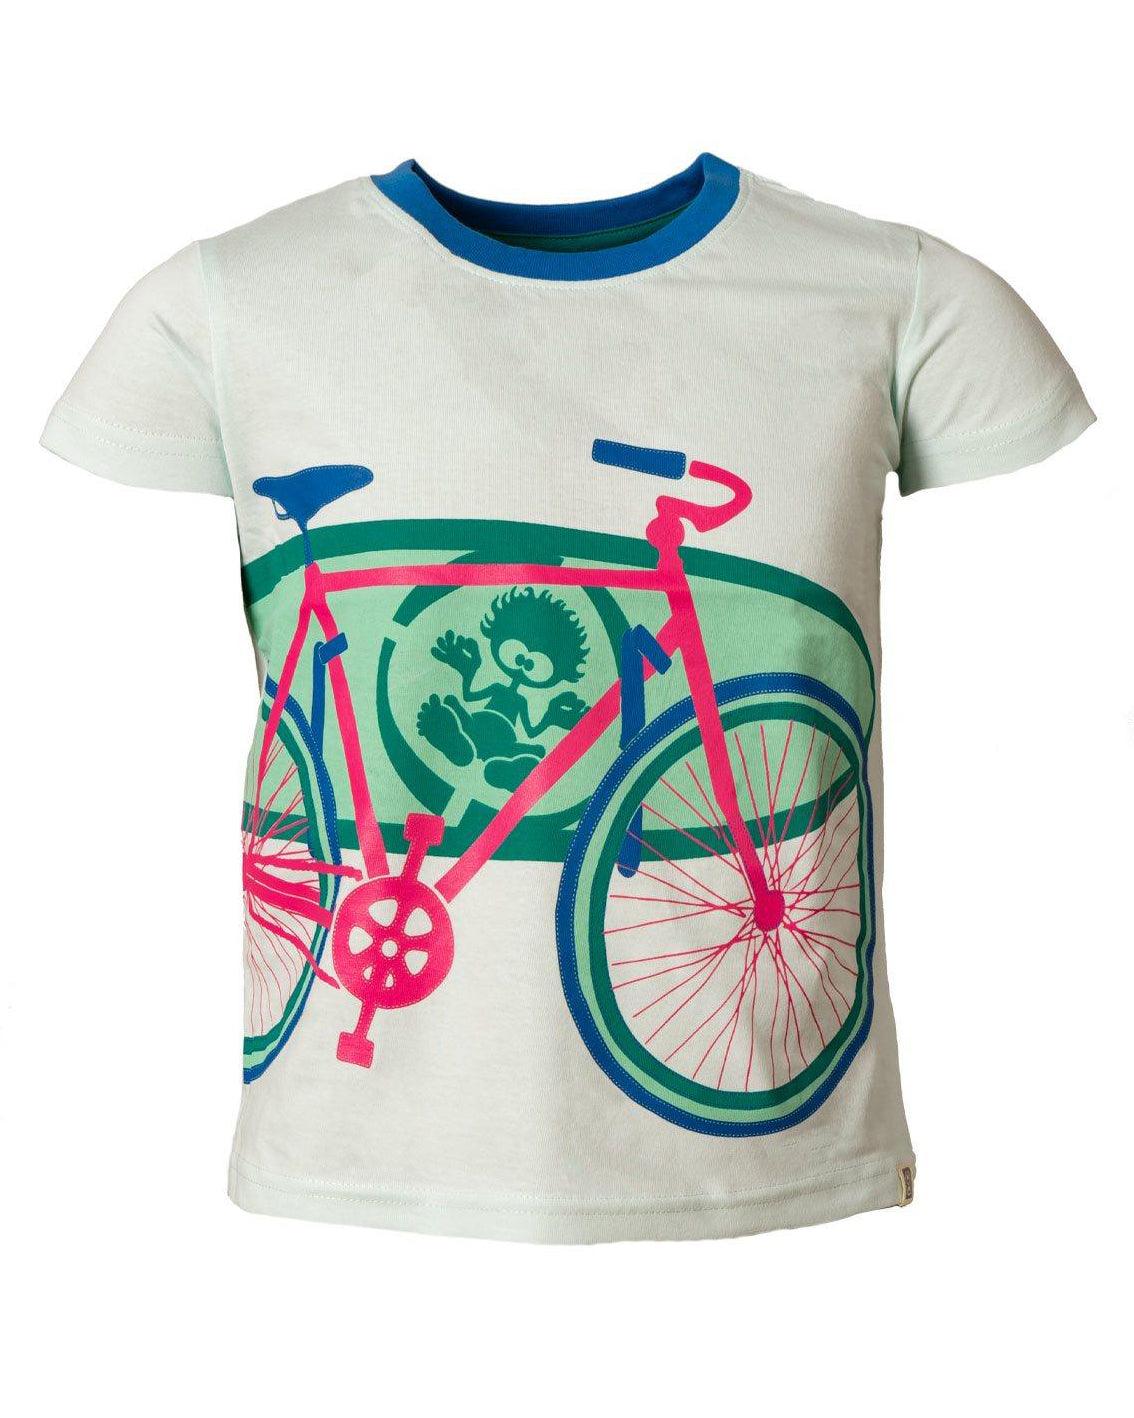 Ride On - Younger Boys T-Shirt - 2-6 Yrs